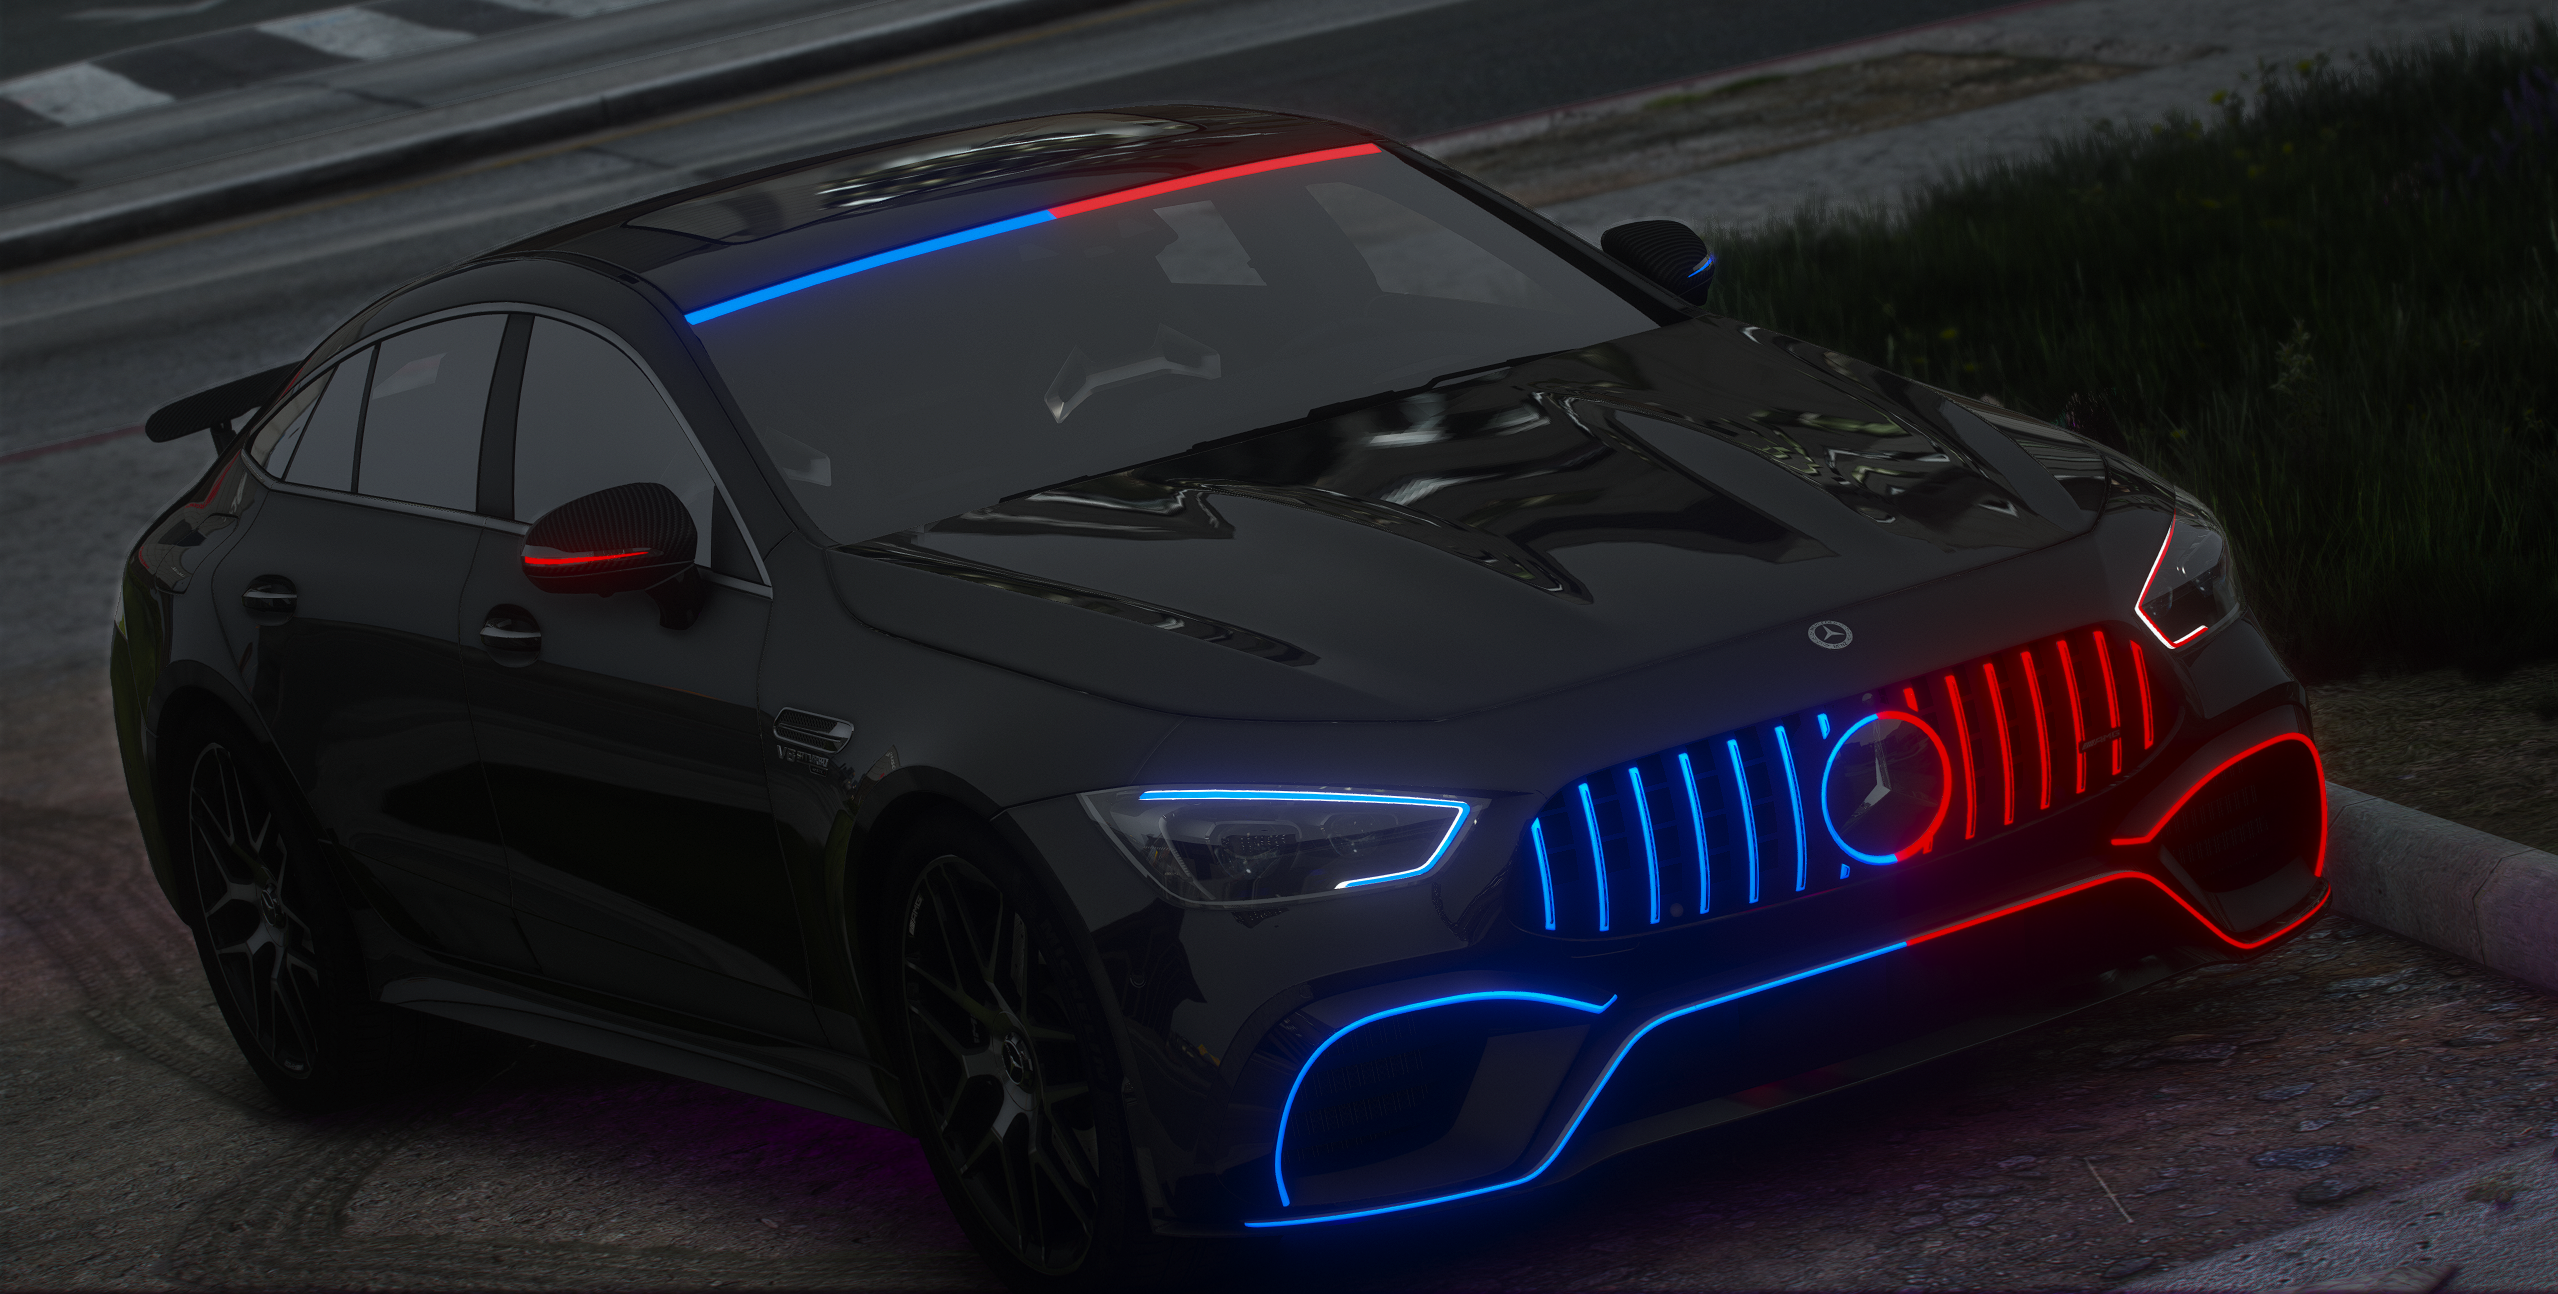 AMG GT 63S 4Matic 2019 FiveM Police Vehicle